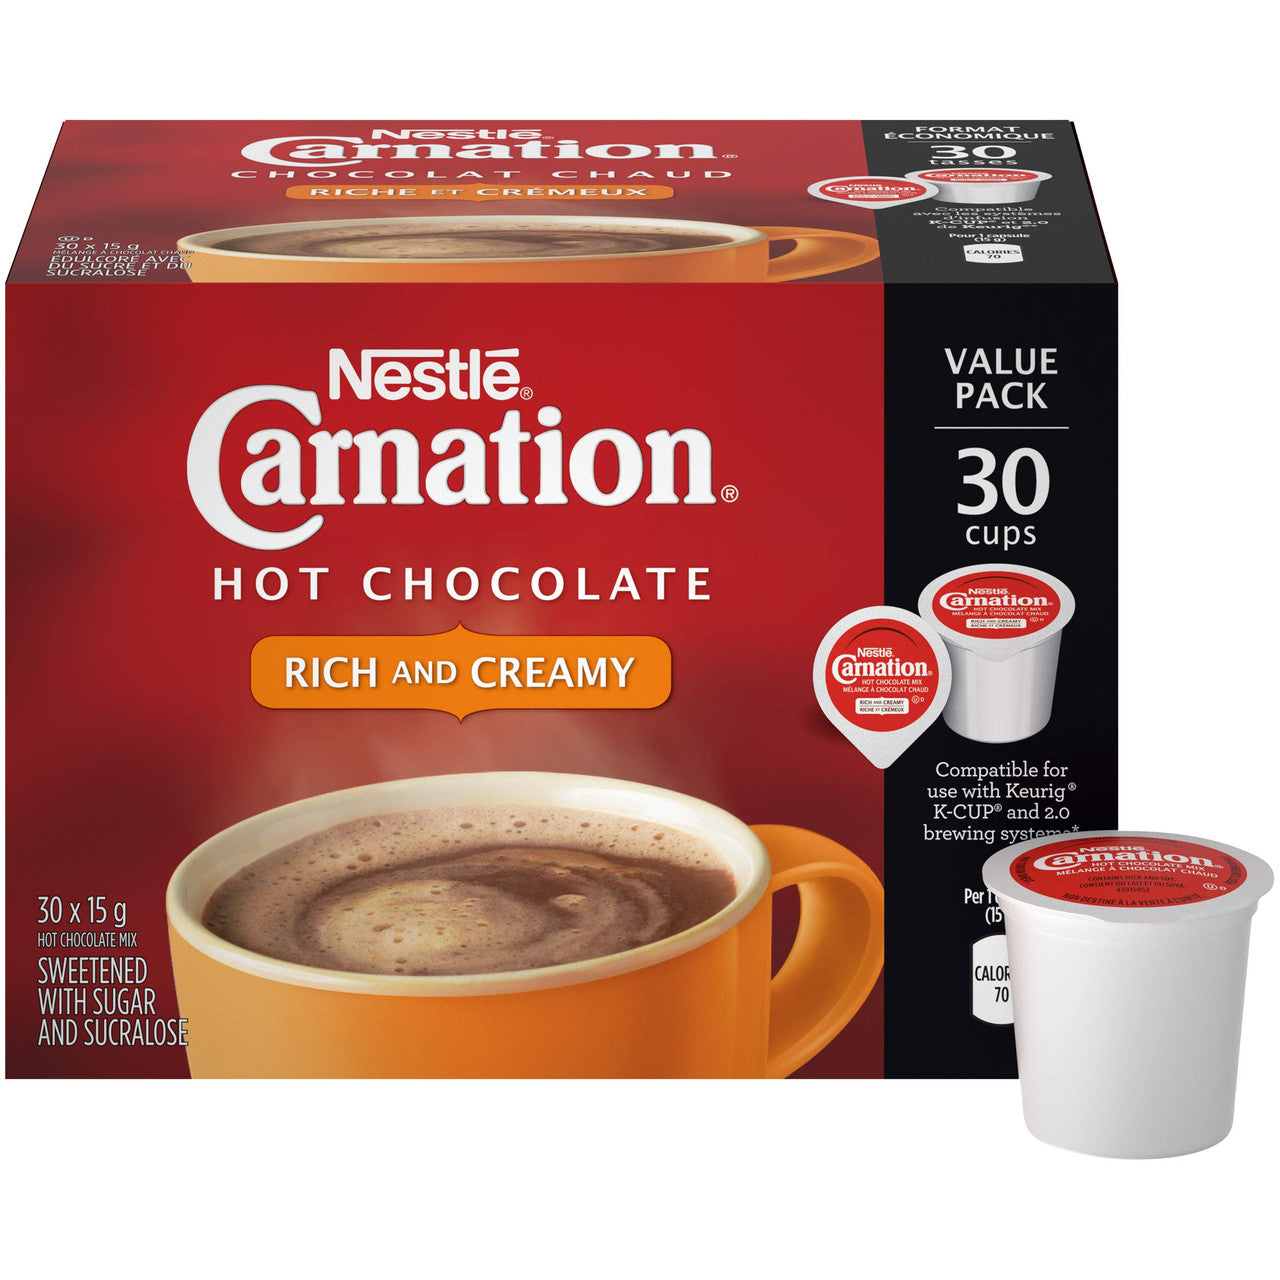 Nestle Carnation Rich and Creamy Hot Chocolate Keurig Compatible K-Cup Capsule Pods, 30 x 15g, 30 cups {Imported from Canada}